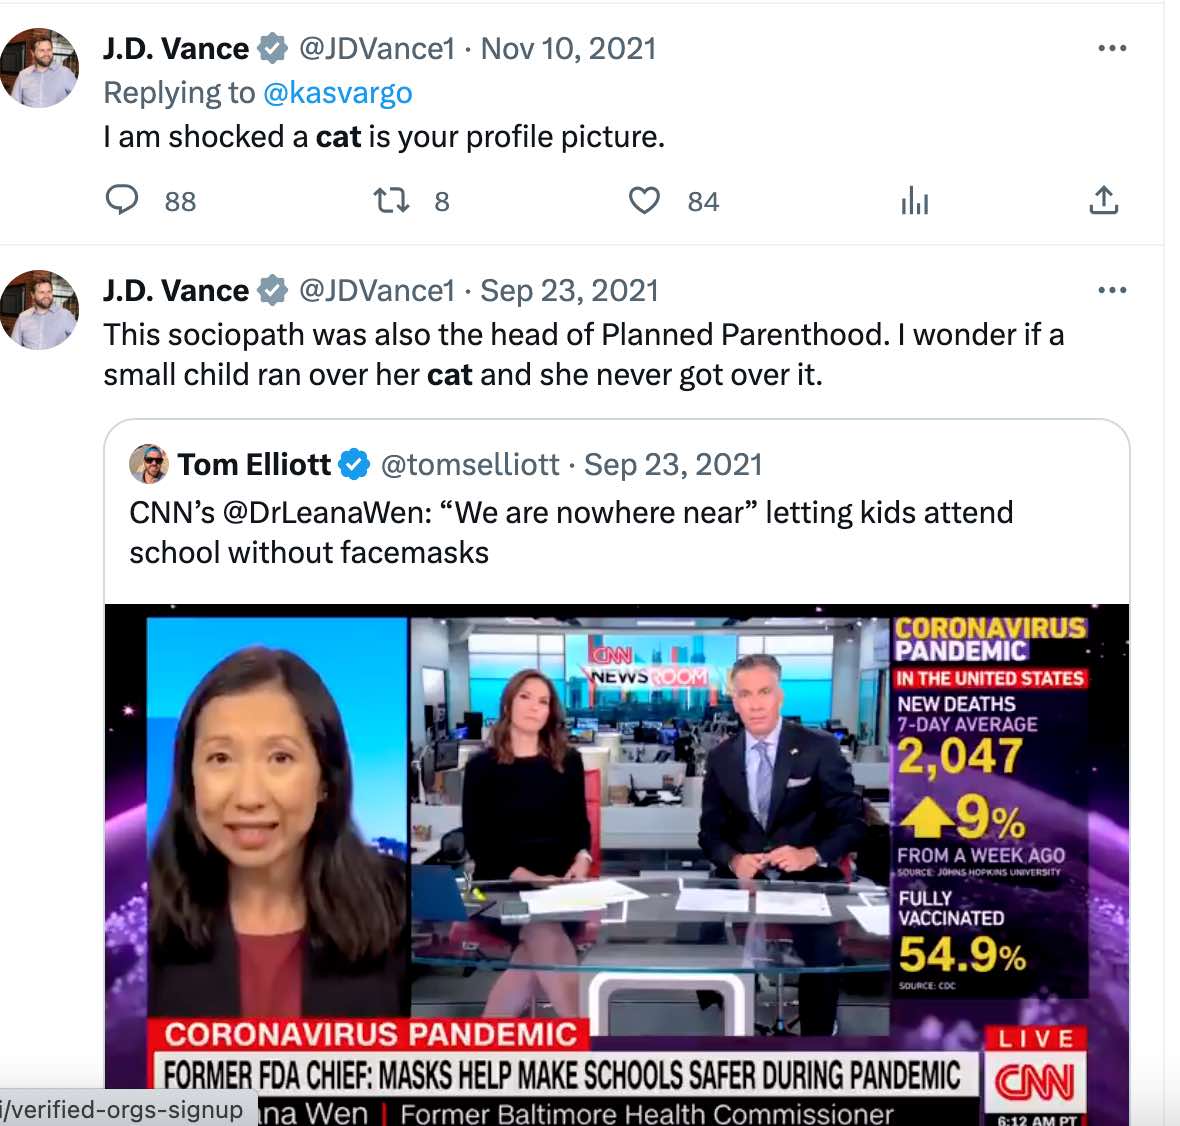 JD Vance tweets: "I am shocked a cat is your profile picture" and "This sociopath was also the head of Planned Parenthood. I wonder if a
small child ran over her cat and she never got over it."